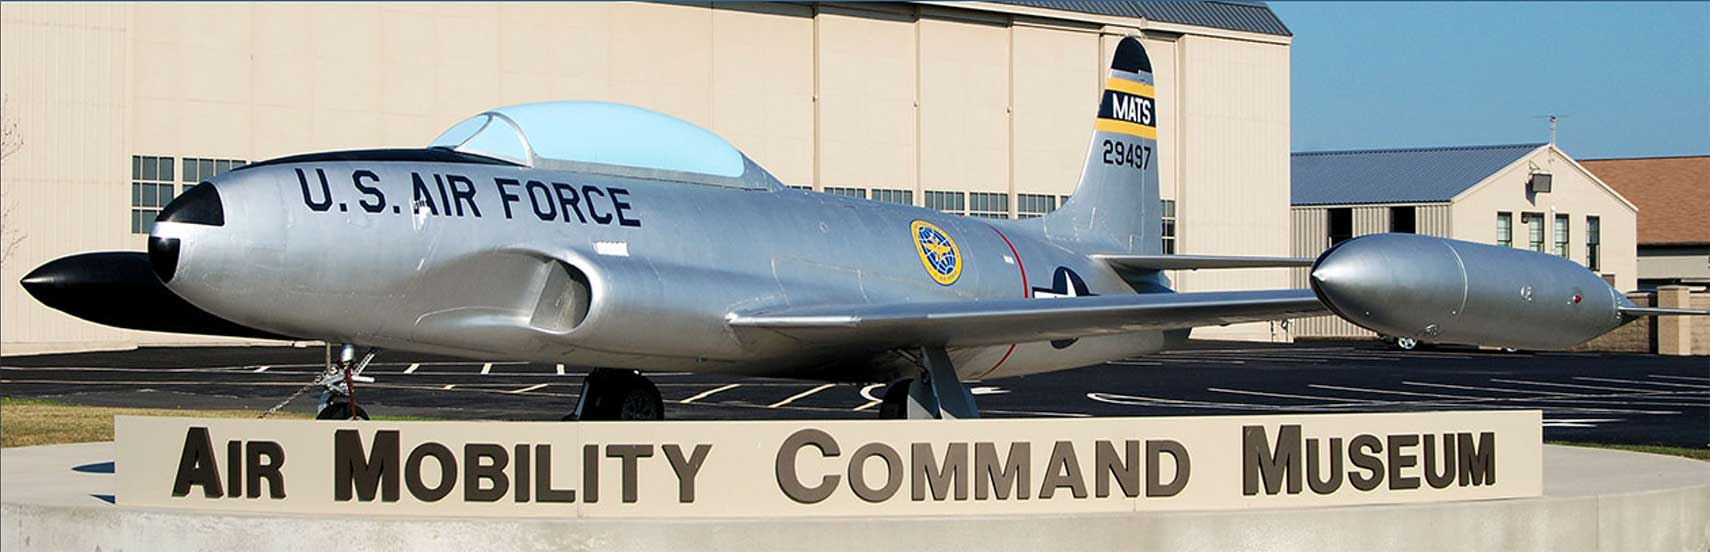 Air Mobility Command Museum, Dover, Delaware